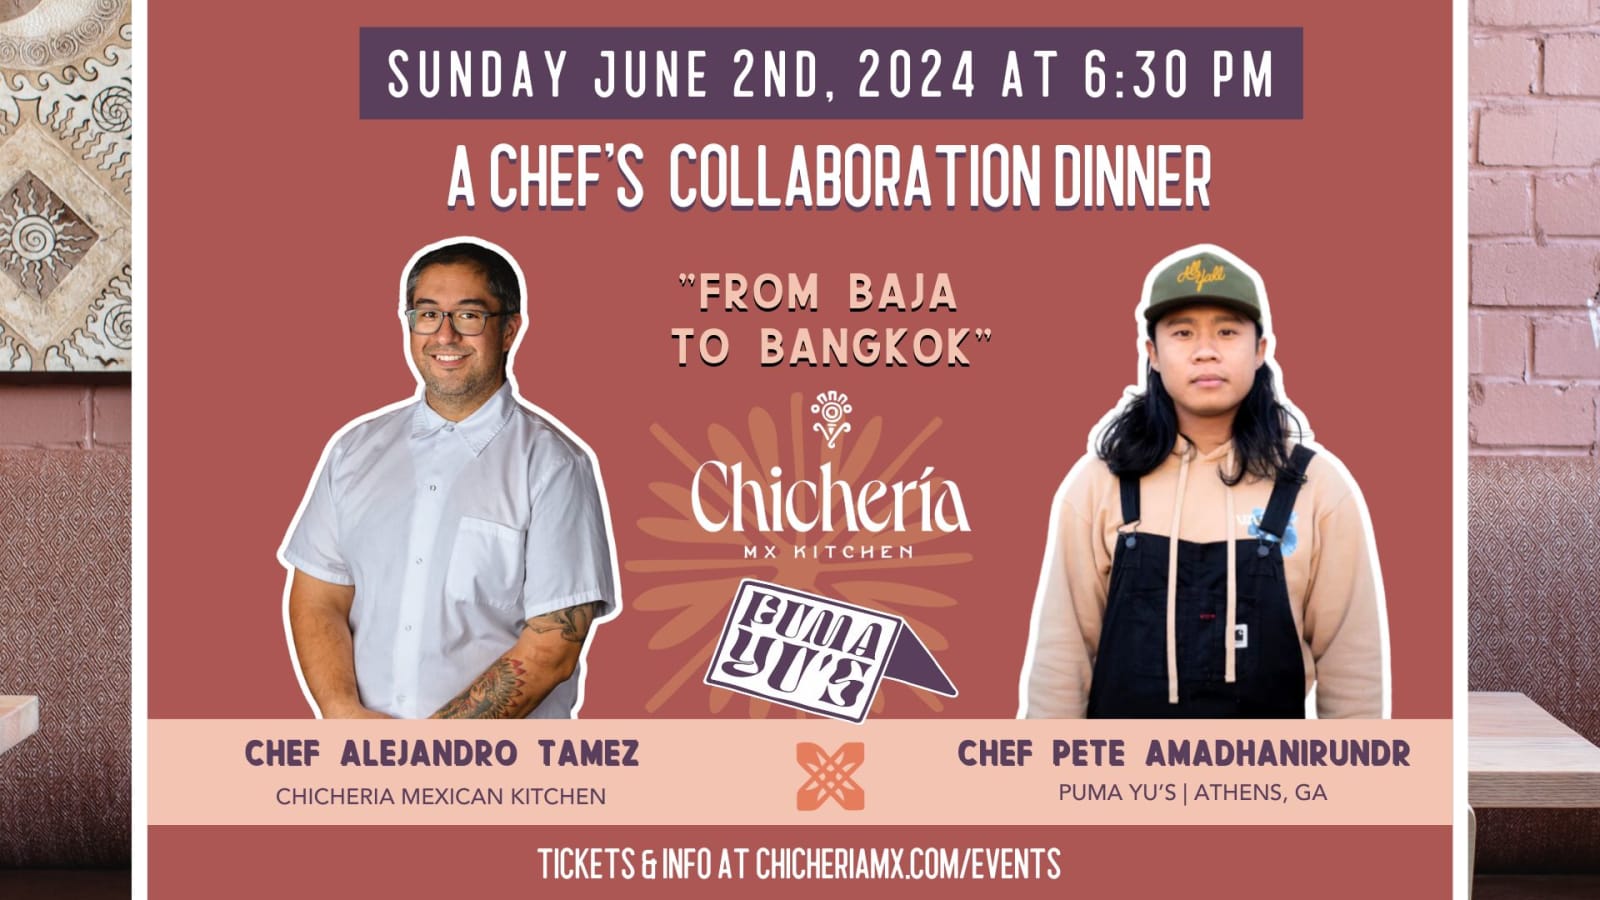 From Baja to Bangkok - A Chefs' Collaboration